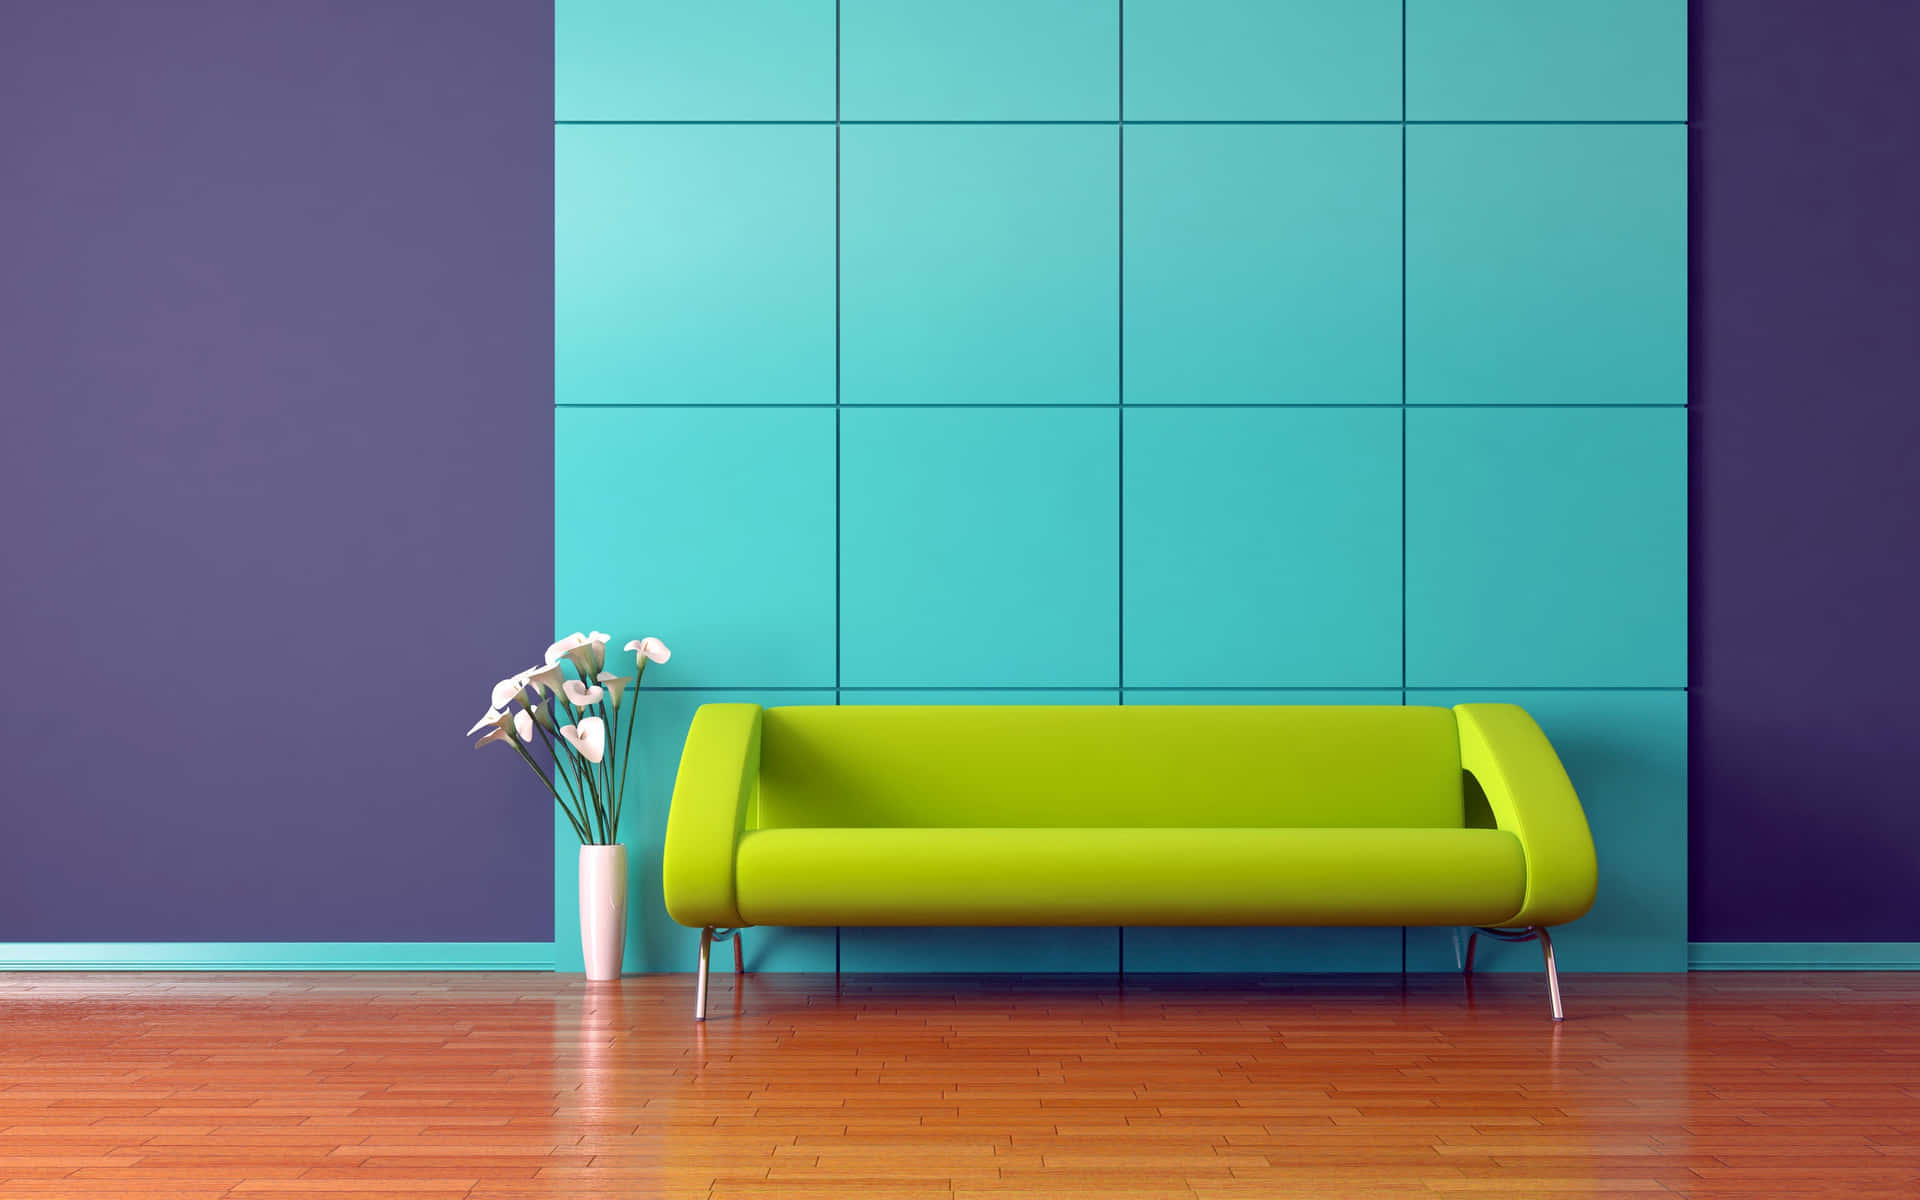 Green Couch In Purple And Blue Room Background